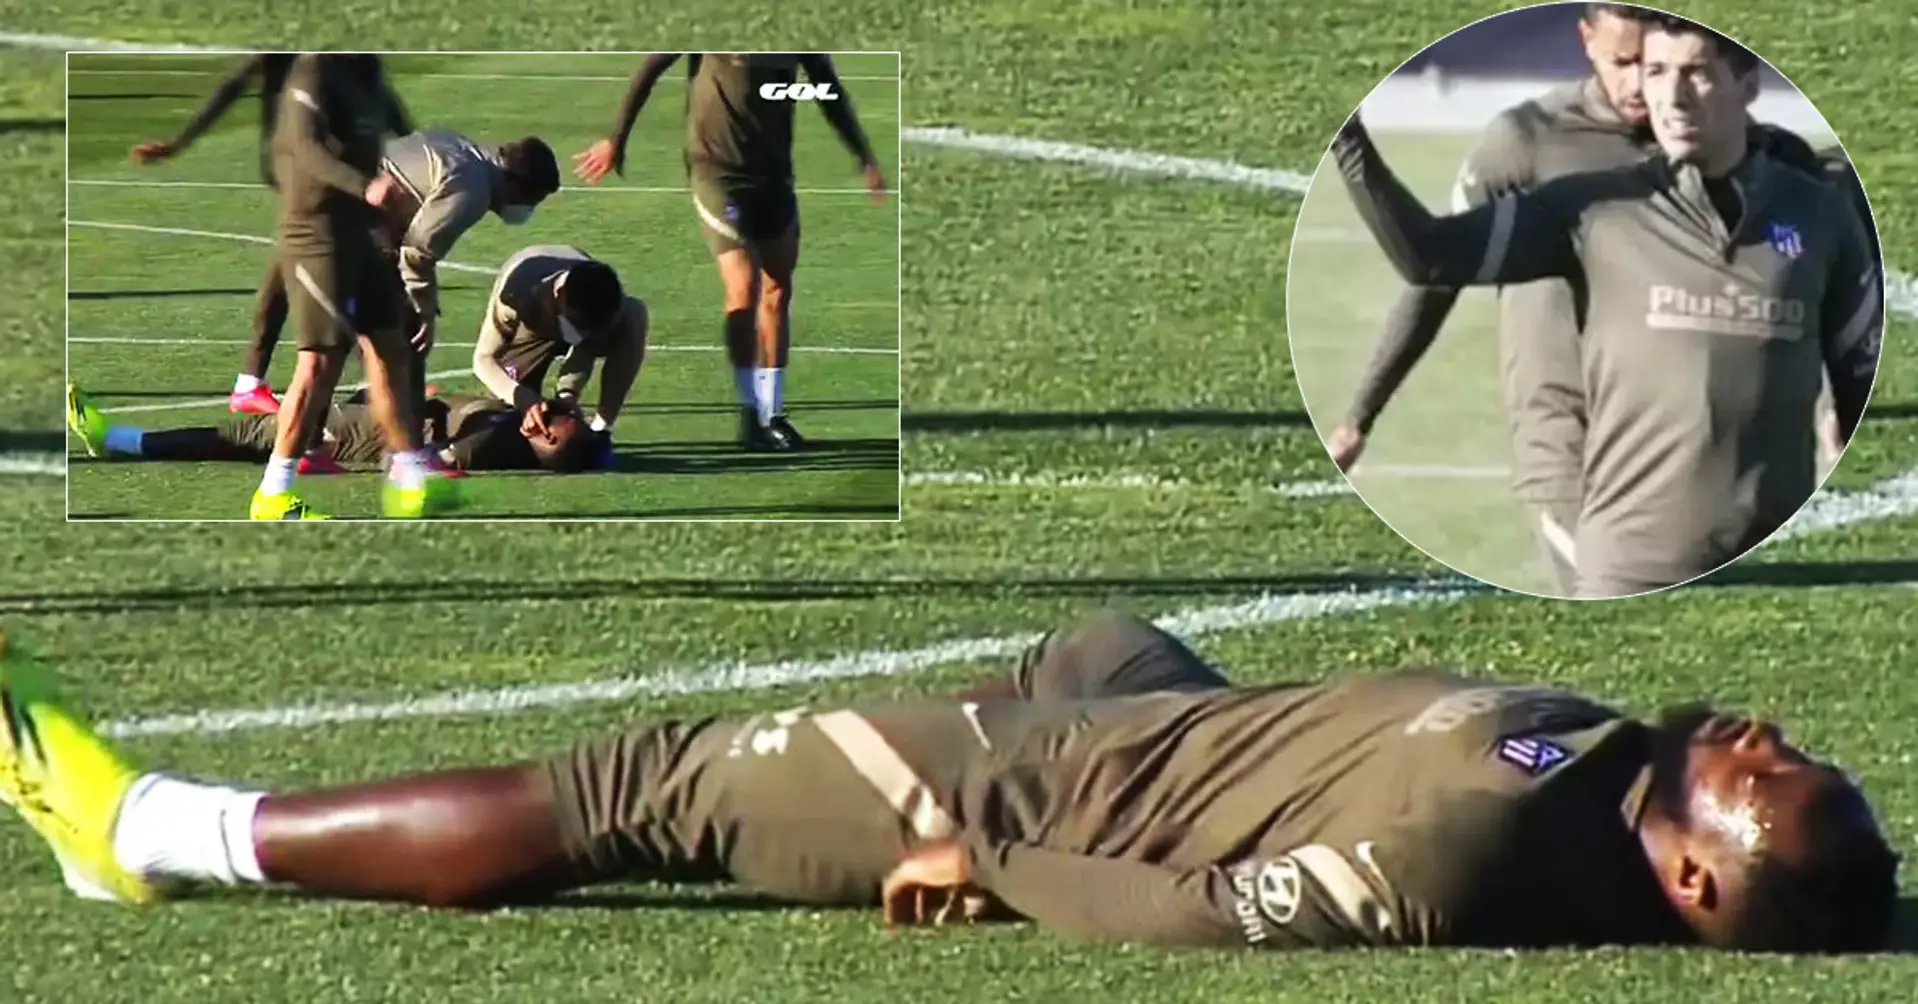 Moussa Dembele faints in the middle of Atletico Madrid training